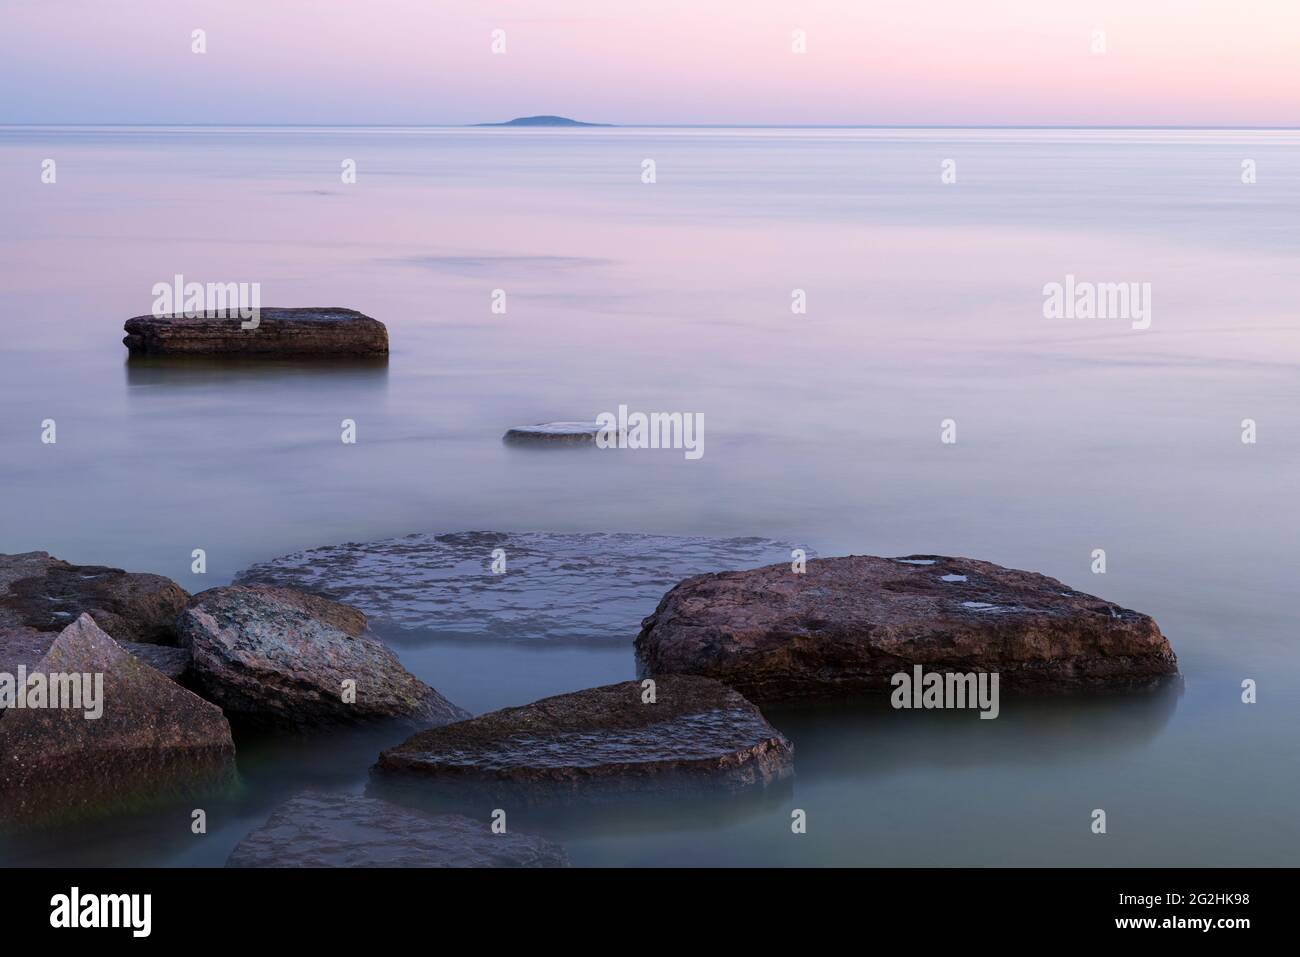 Evening mood on the coast at Byxelkrok, water lapping the stone slabs in the sea, in the background the island of Bla Jungfrun, Sweden, island of Öland Stock Photo